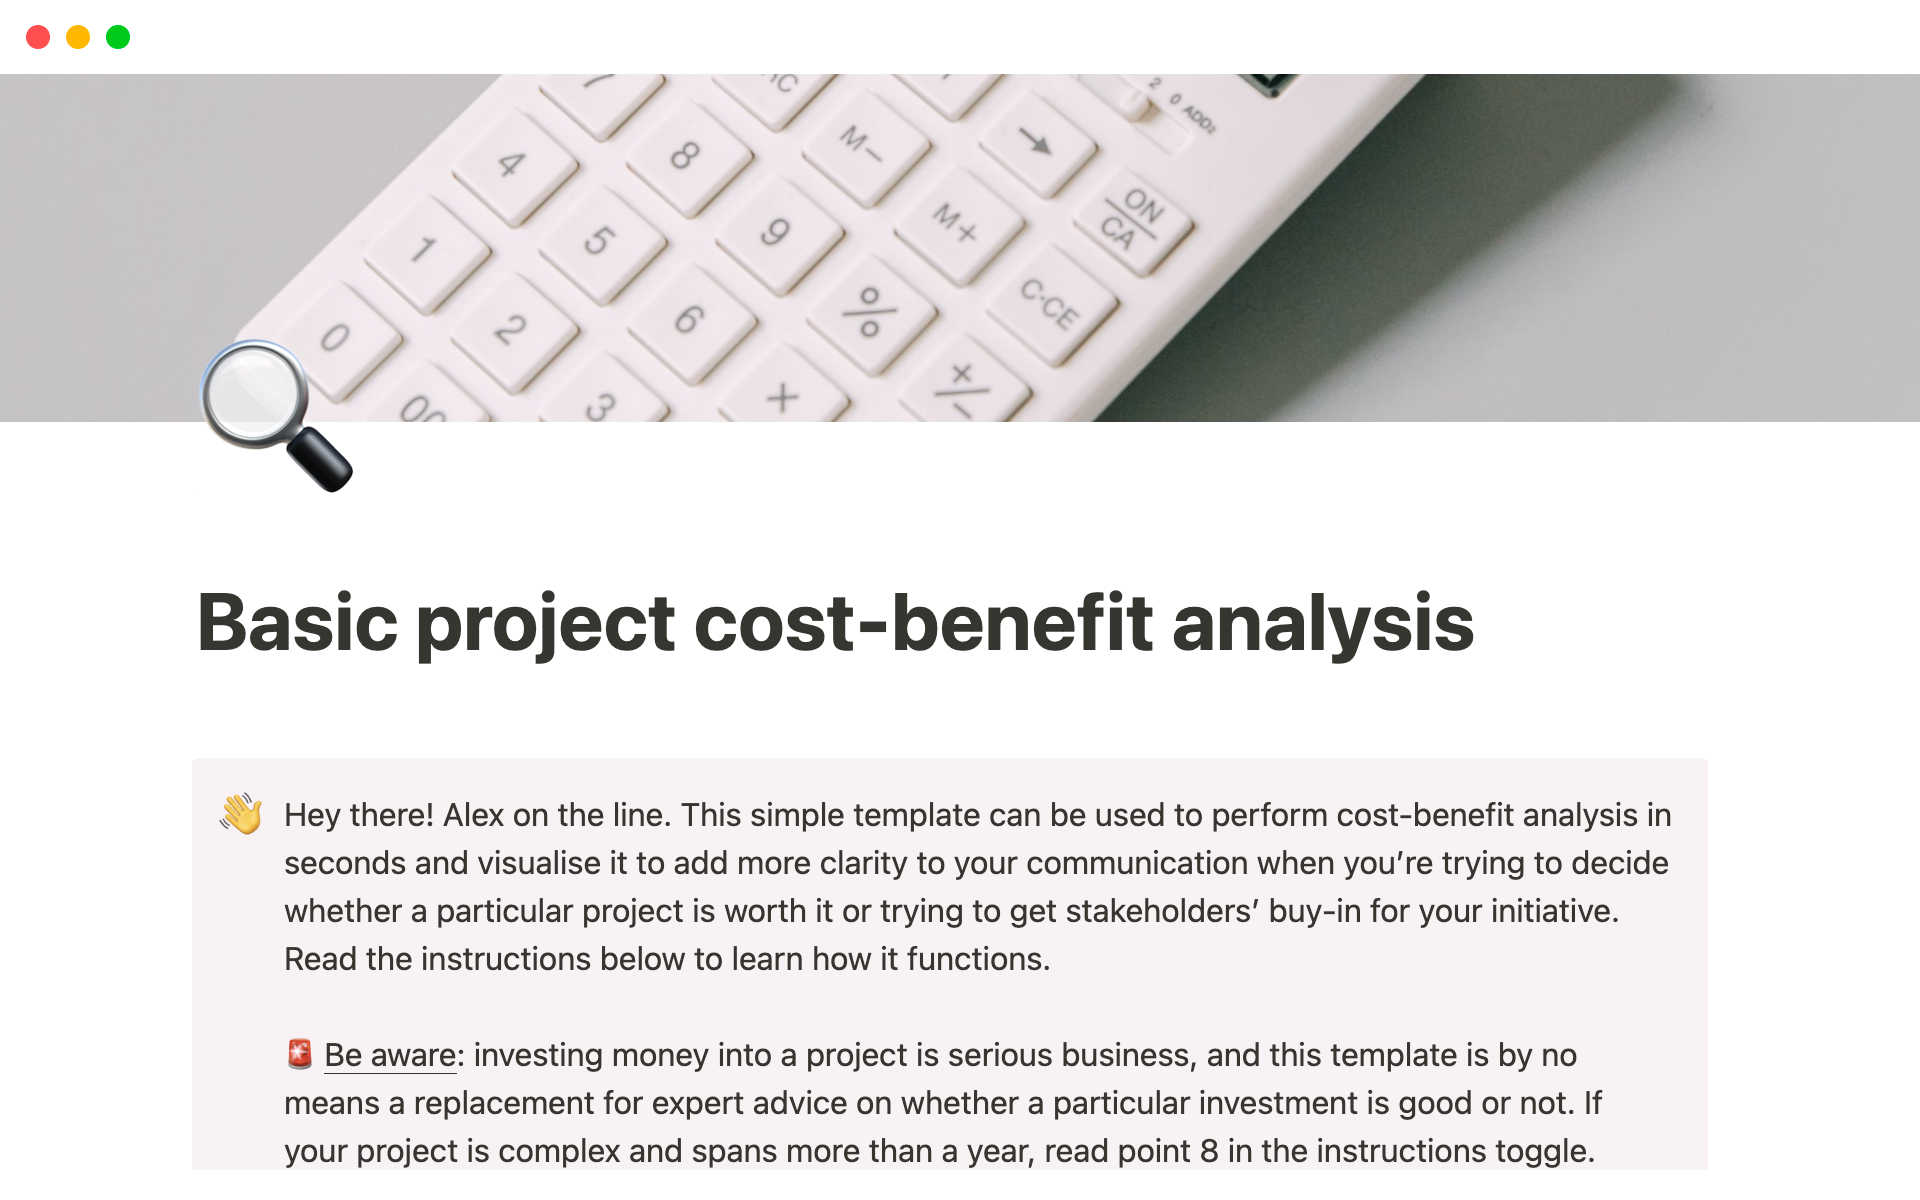 Perform cost-benefit analysis in seconds to decide whether a particular project is worth it or trying to get stakeholders’ buy-in.